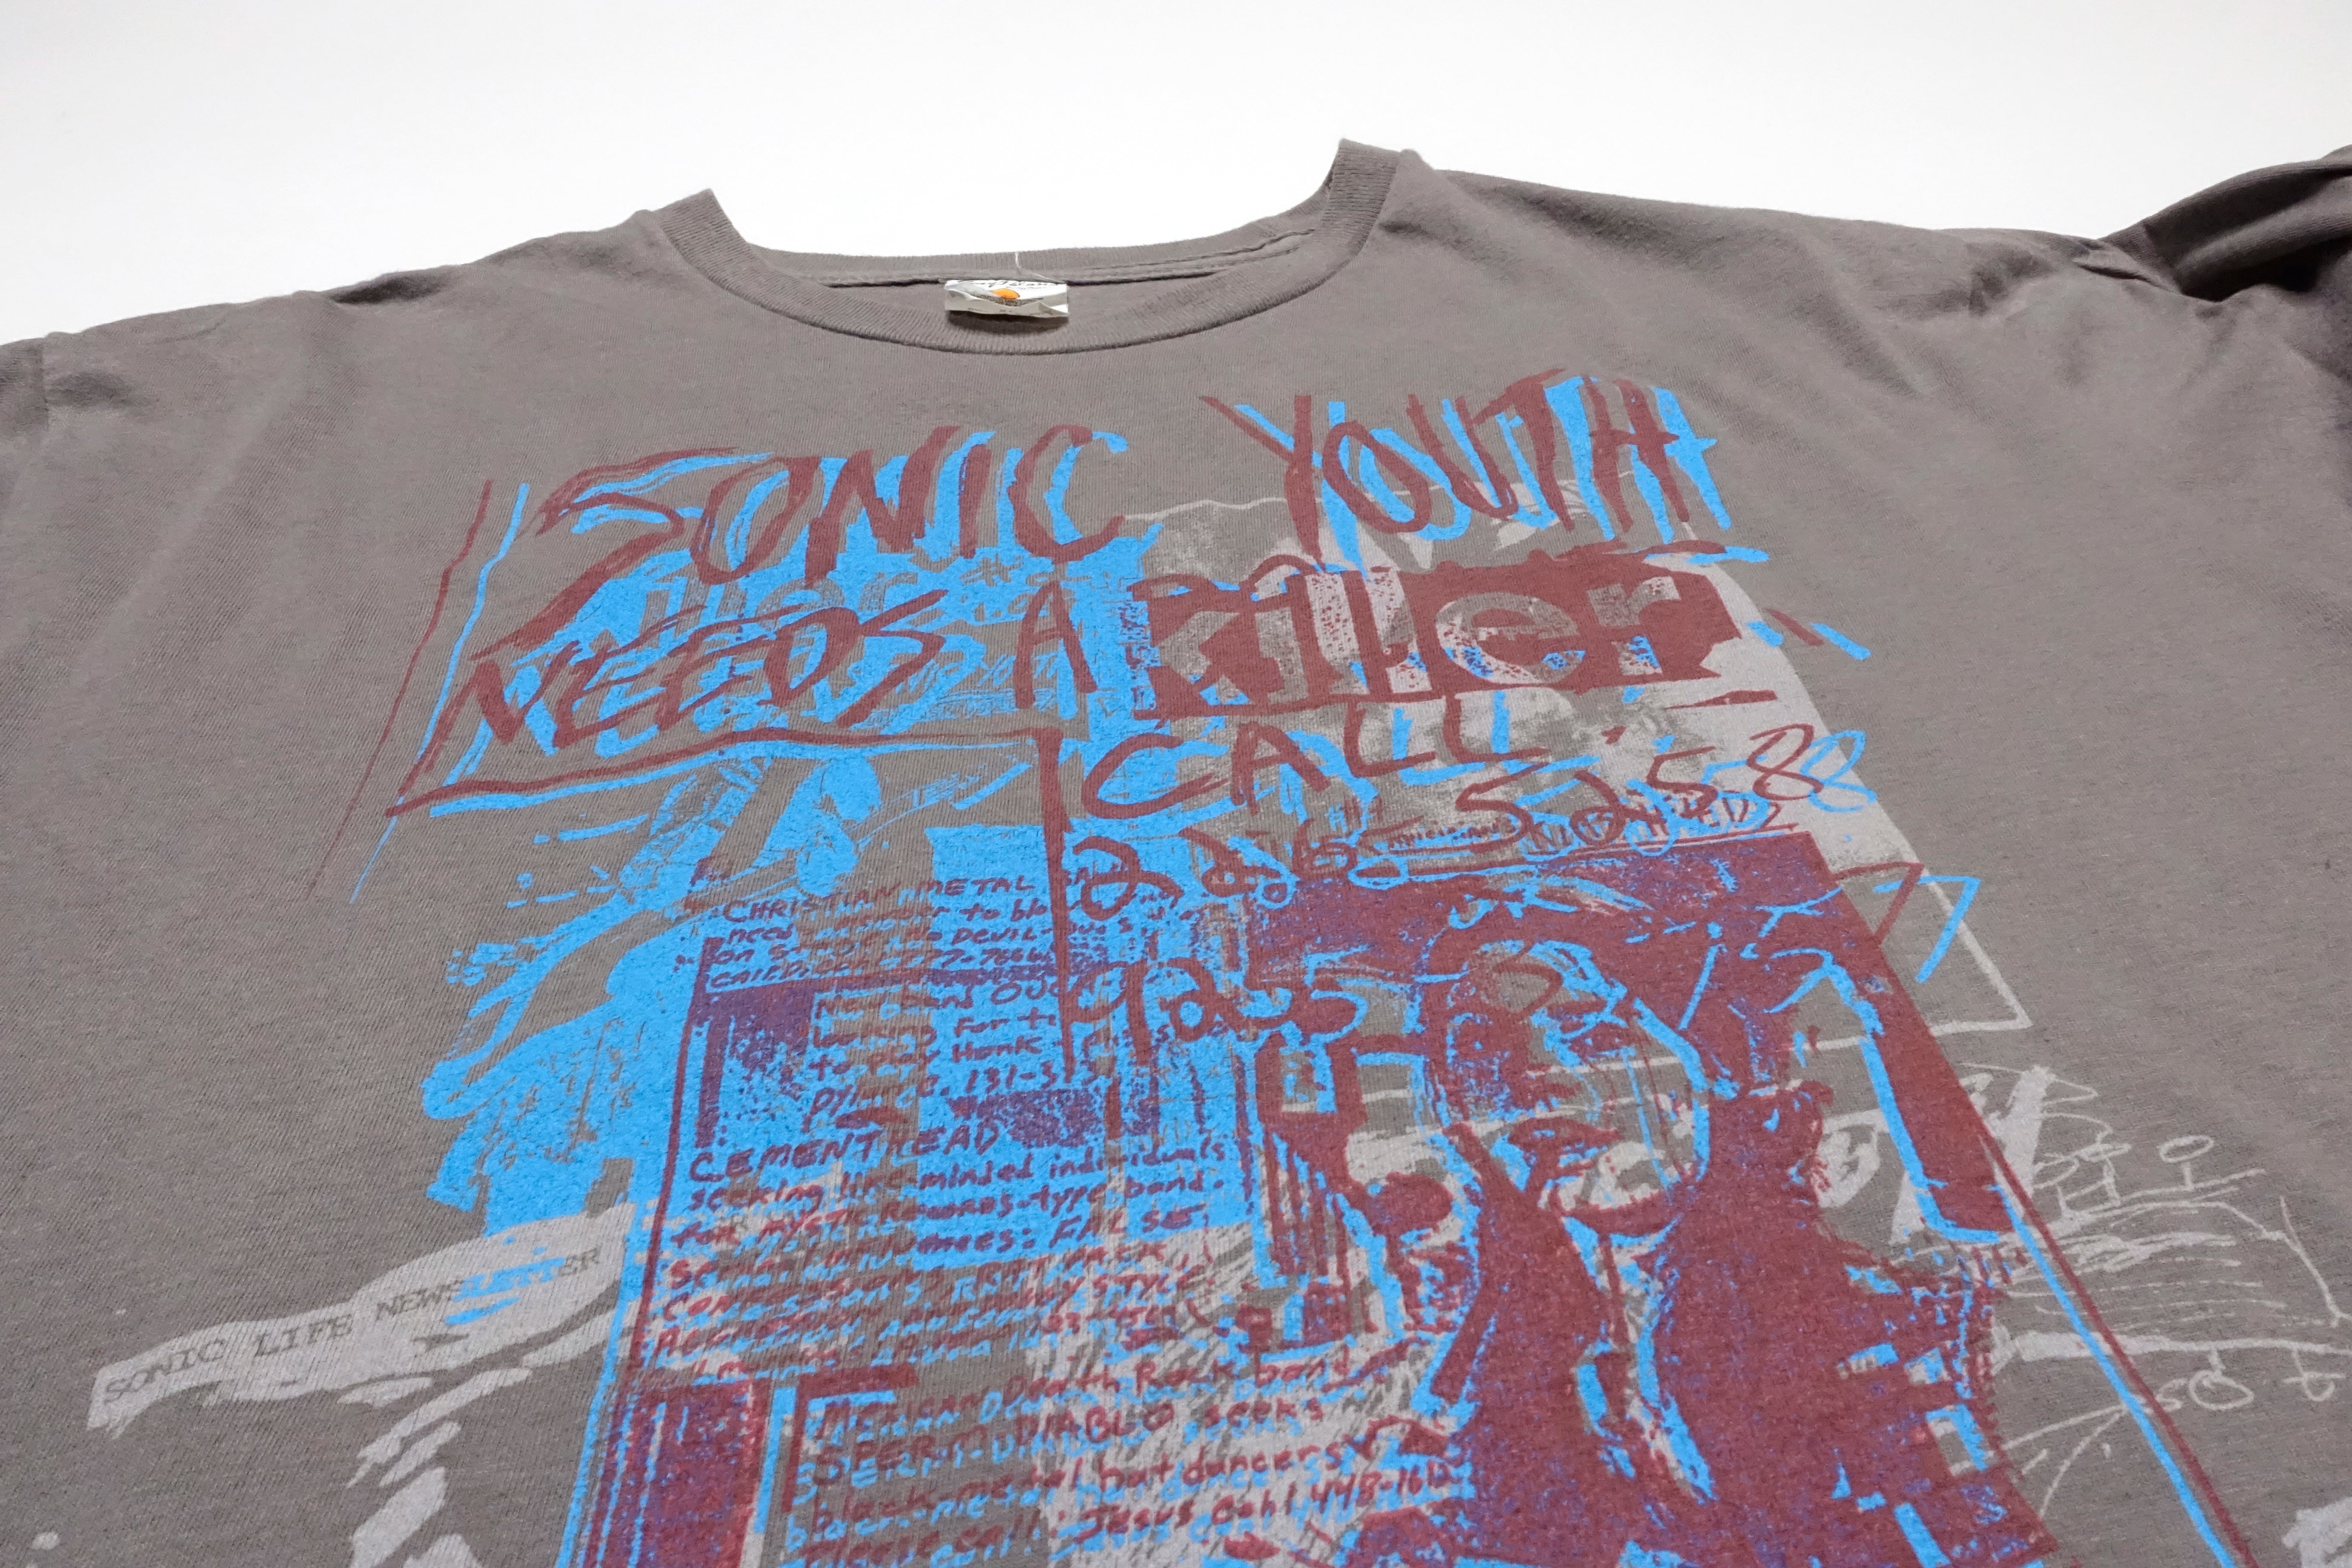 Sonic Youth - Students Protest 00's Tour Shirt Size XL